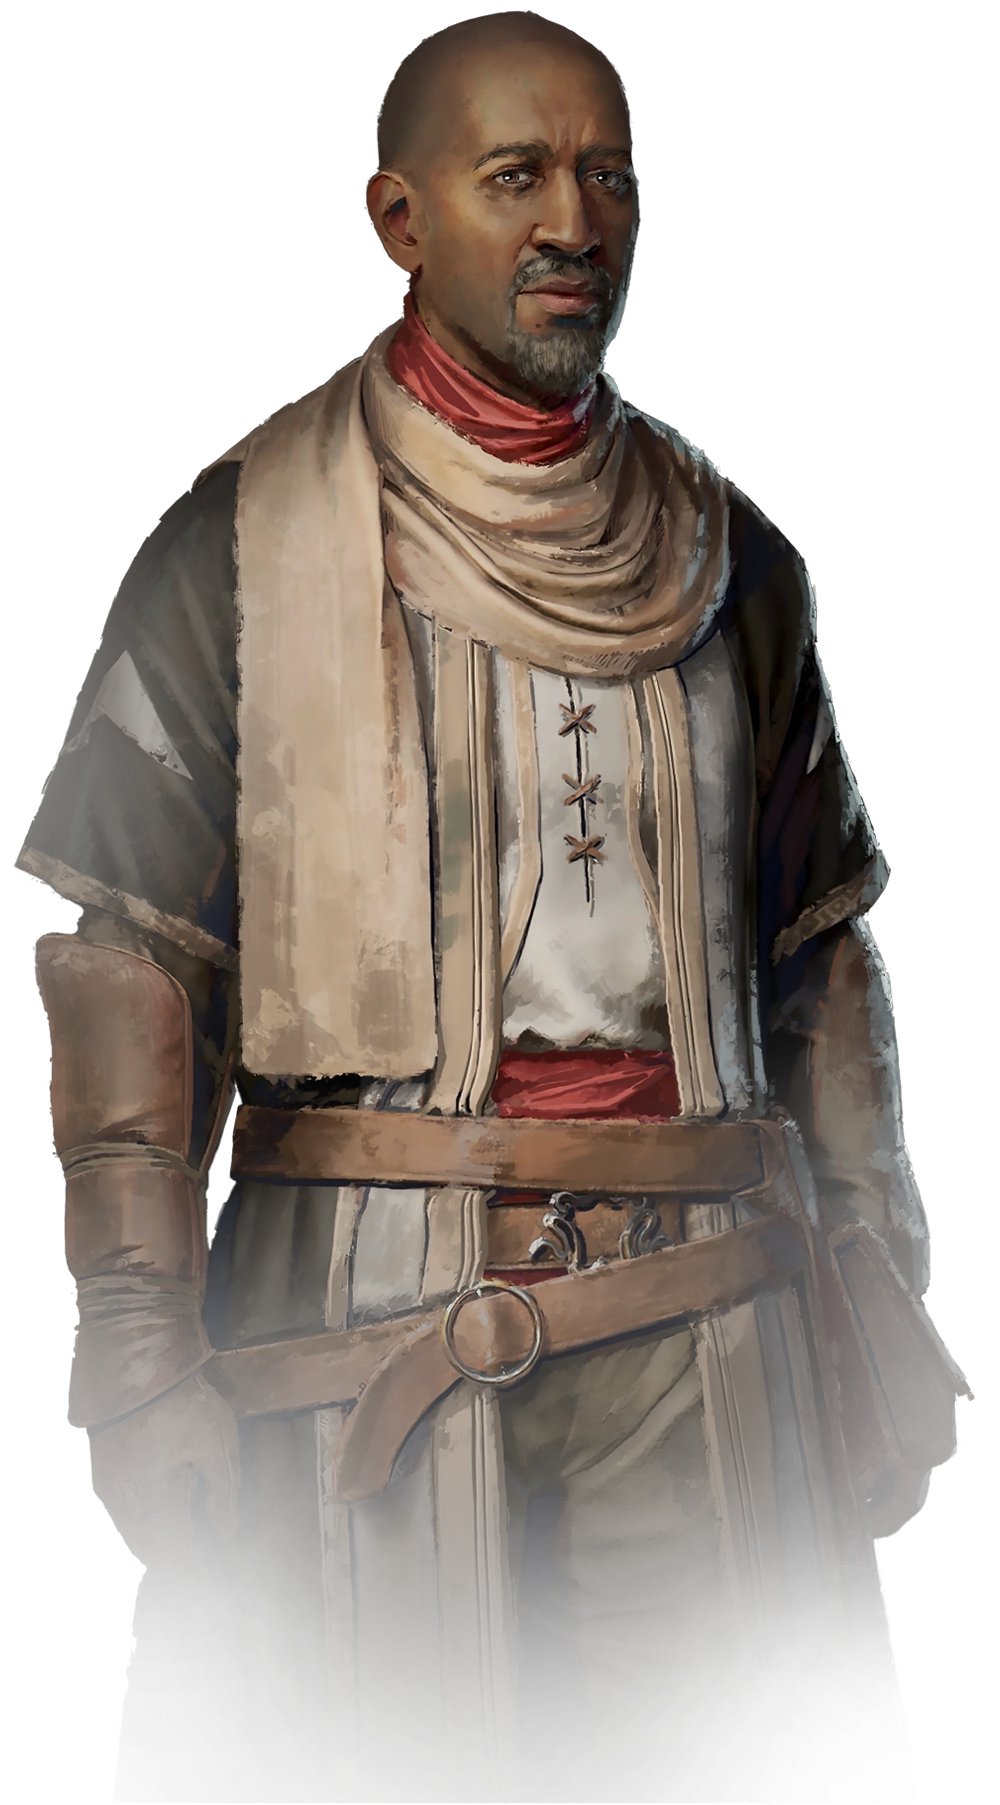 Leave No Man Behind, Assassin's Creed Wiki